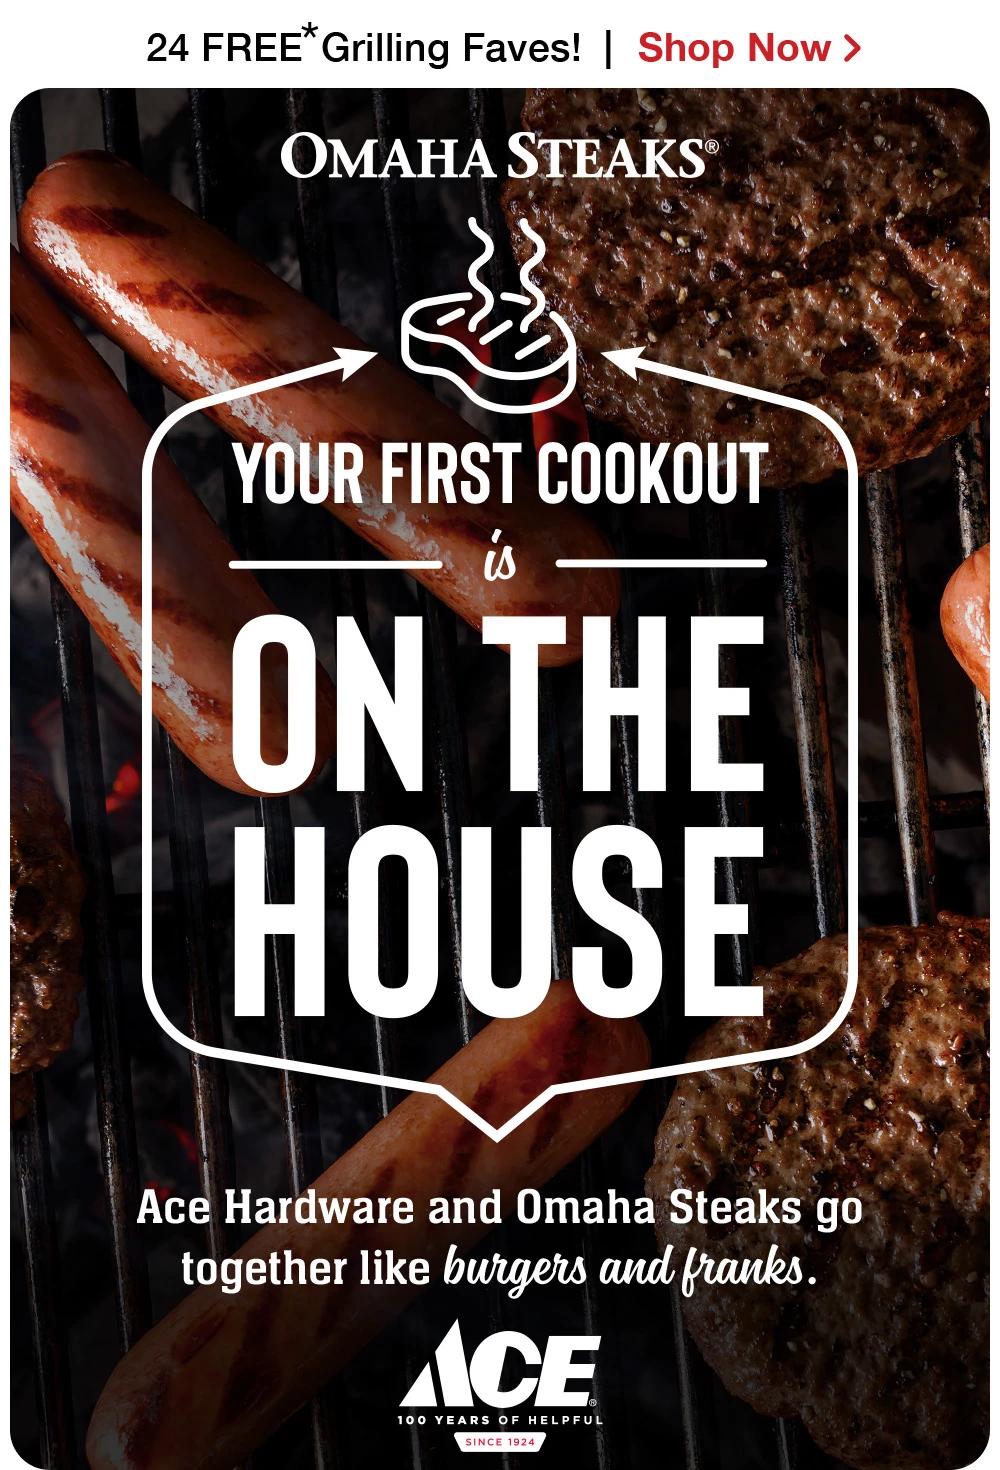 24 FREE Grillables! | Shop Now > | OMAHA STEAKS® | YOUR FIRST COOKOUT is ON THE HOUSE | Ace Hardware and Omaha Steaks go together like grills and grillables. || ACE Hardware